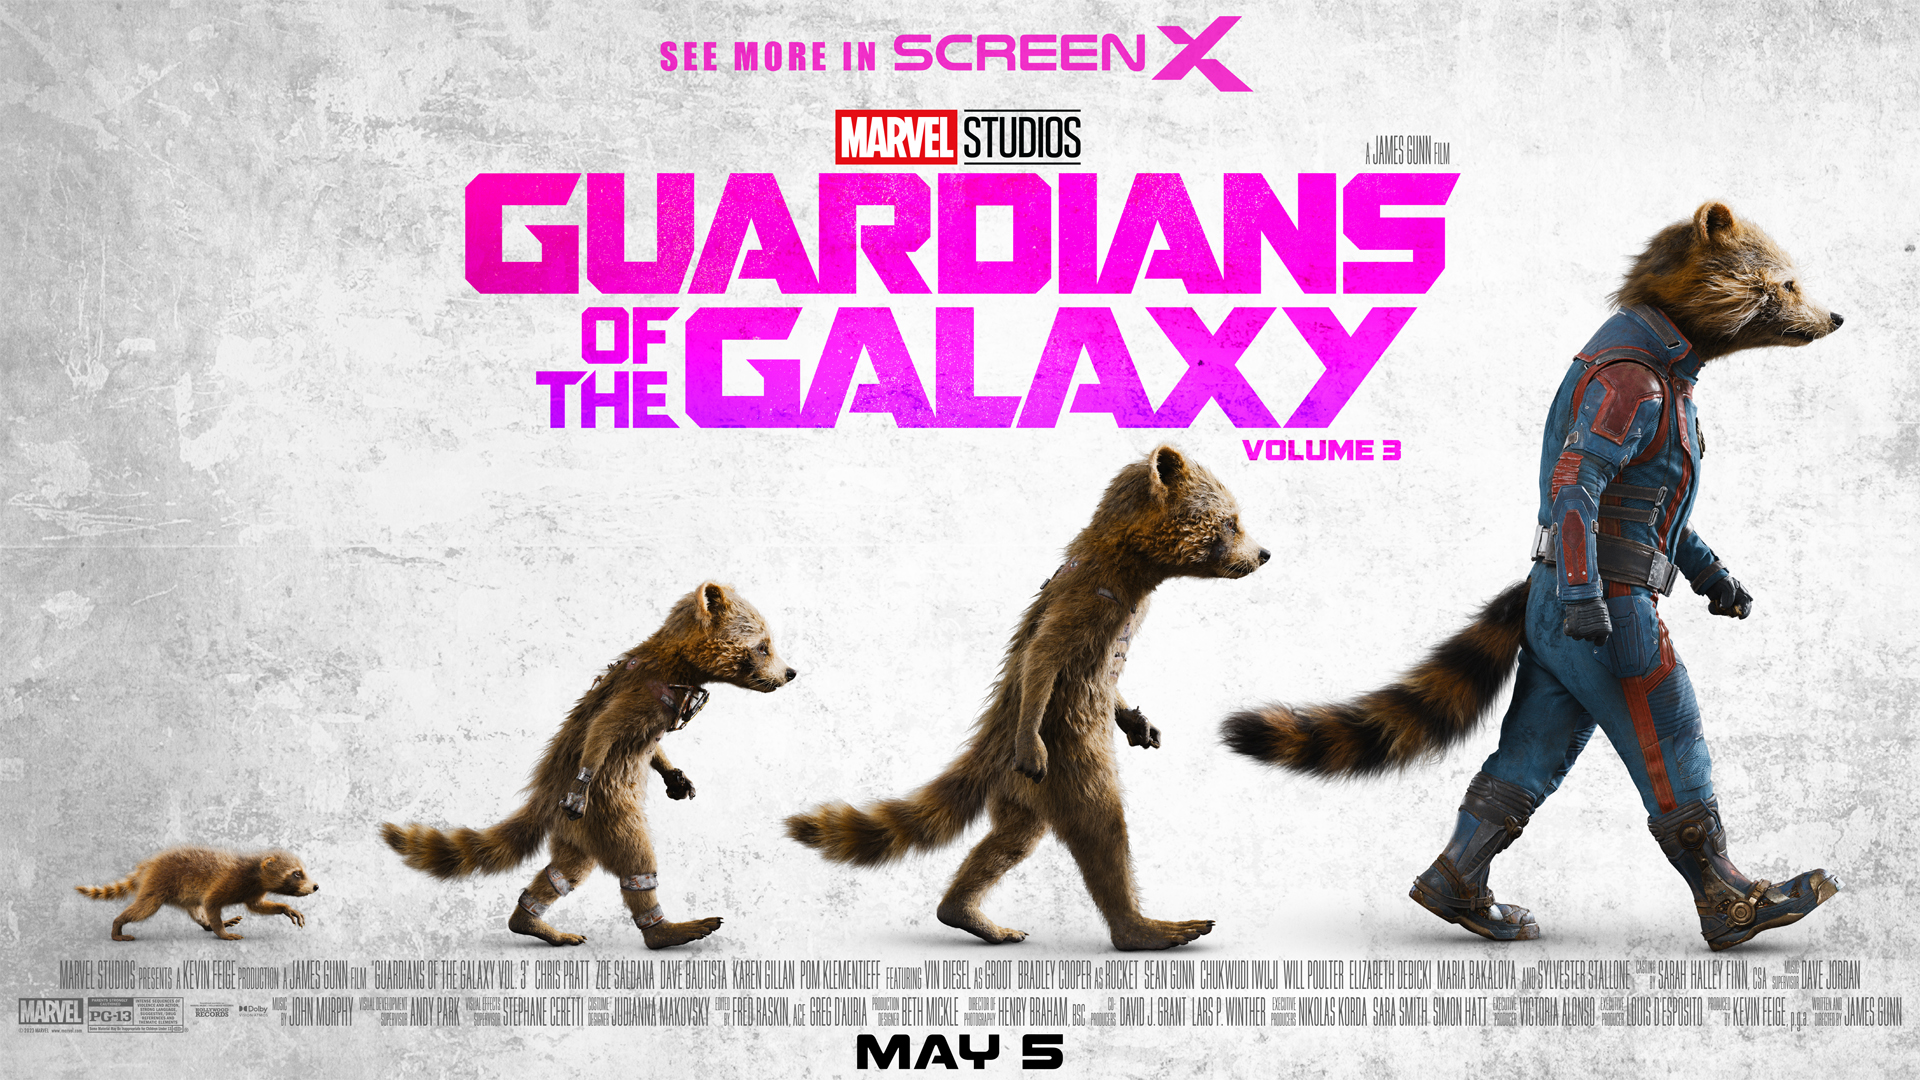 Guardians of the Galaxy on Twitter: Check out the exclusive @screenxusa artwork for Marvel Studios' Guardians of the Galaxy Vol. 3, only in theaters May 5. Get tickets now: https://t.co/eRzaW2Gx1x https://t.co/tlwz71iV5S /